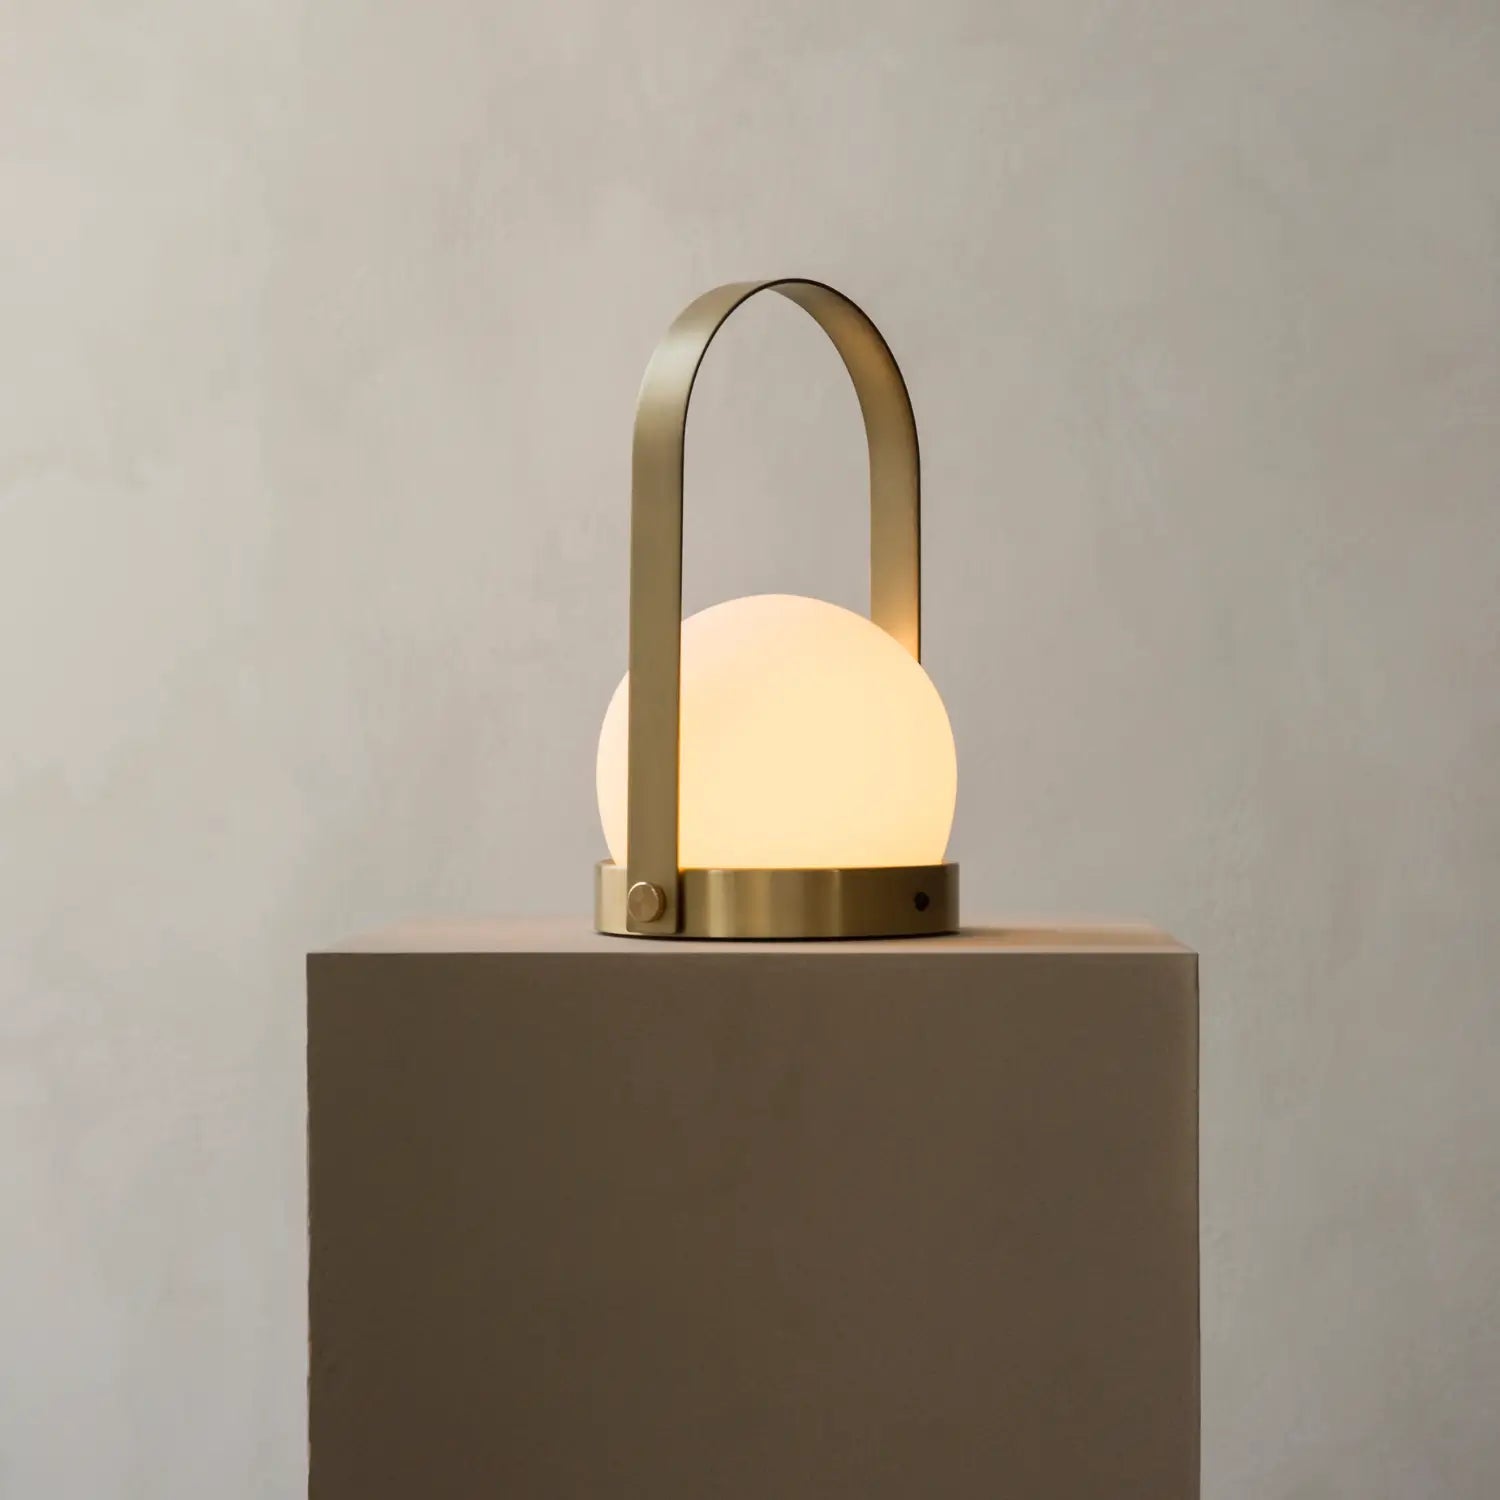 Audo Copenhagen Carrie LED Lamp Brushed Brass - KANSO#Color_Brushed Brass